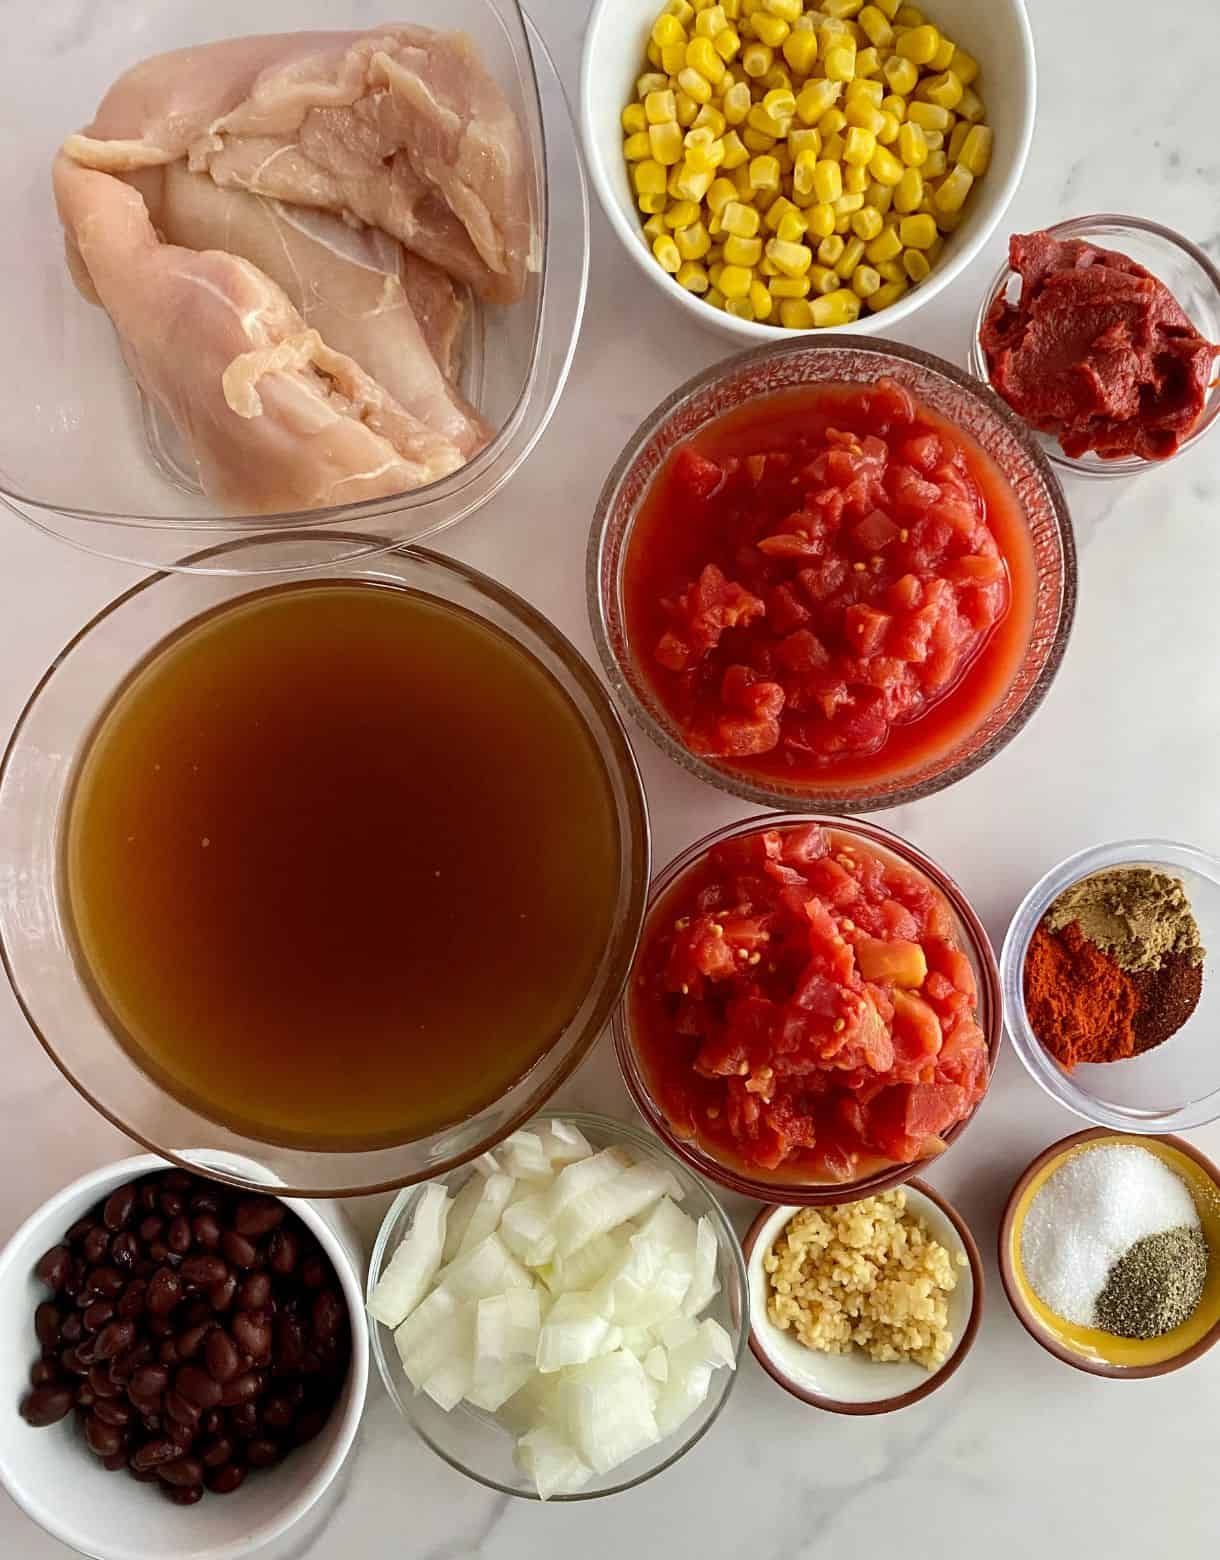 Chicken broth, diced tomatoes, corn, black beans, onion, garlic, salt, pepper, spices, tomato paste and raw chicken.